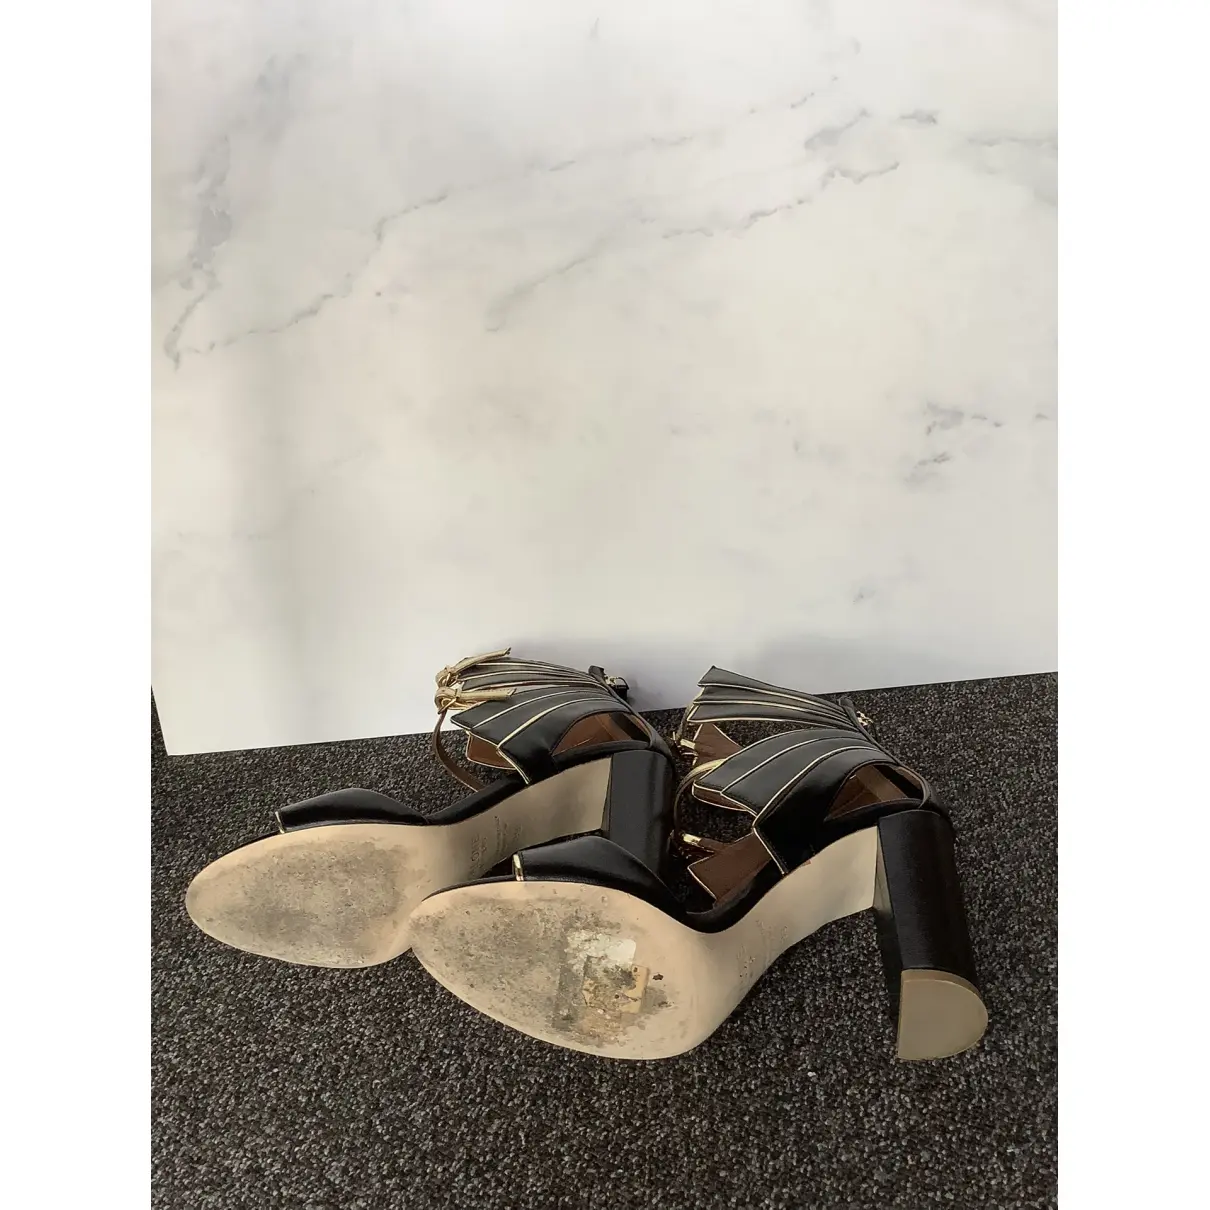 Leather sandal Malone Souliers